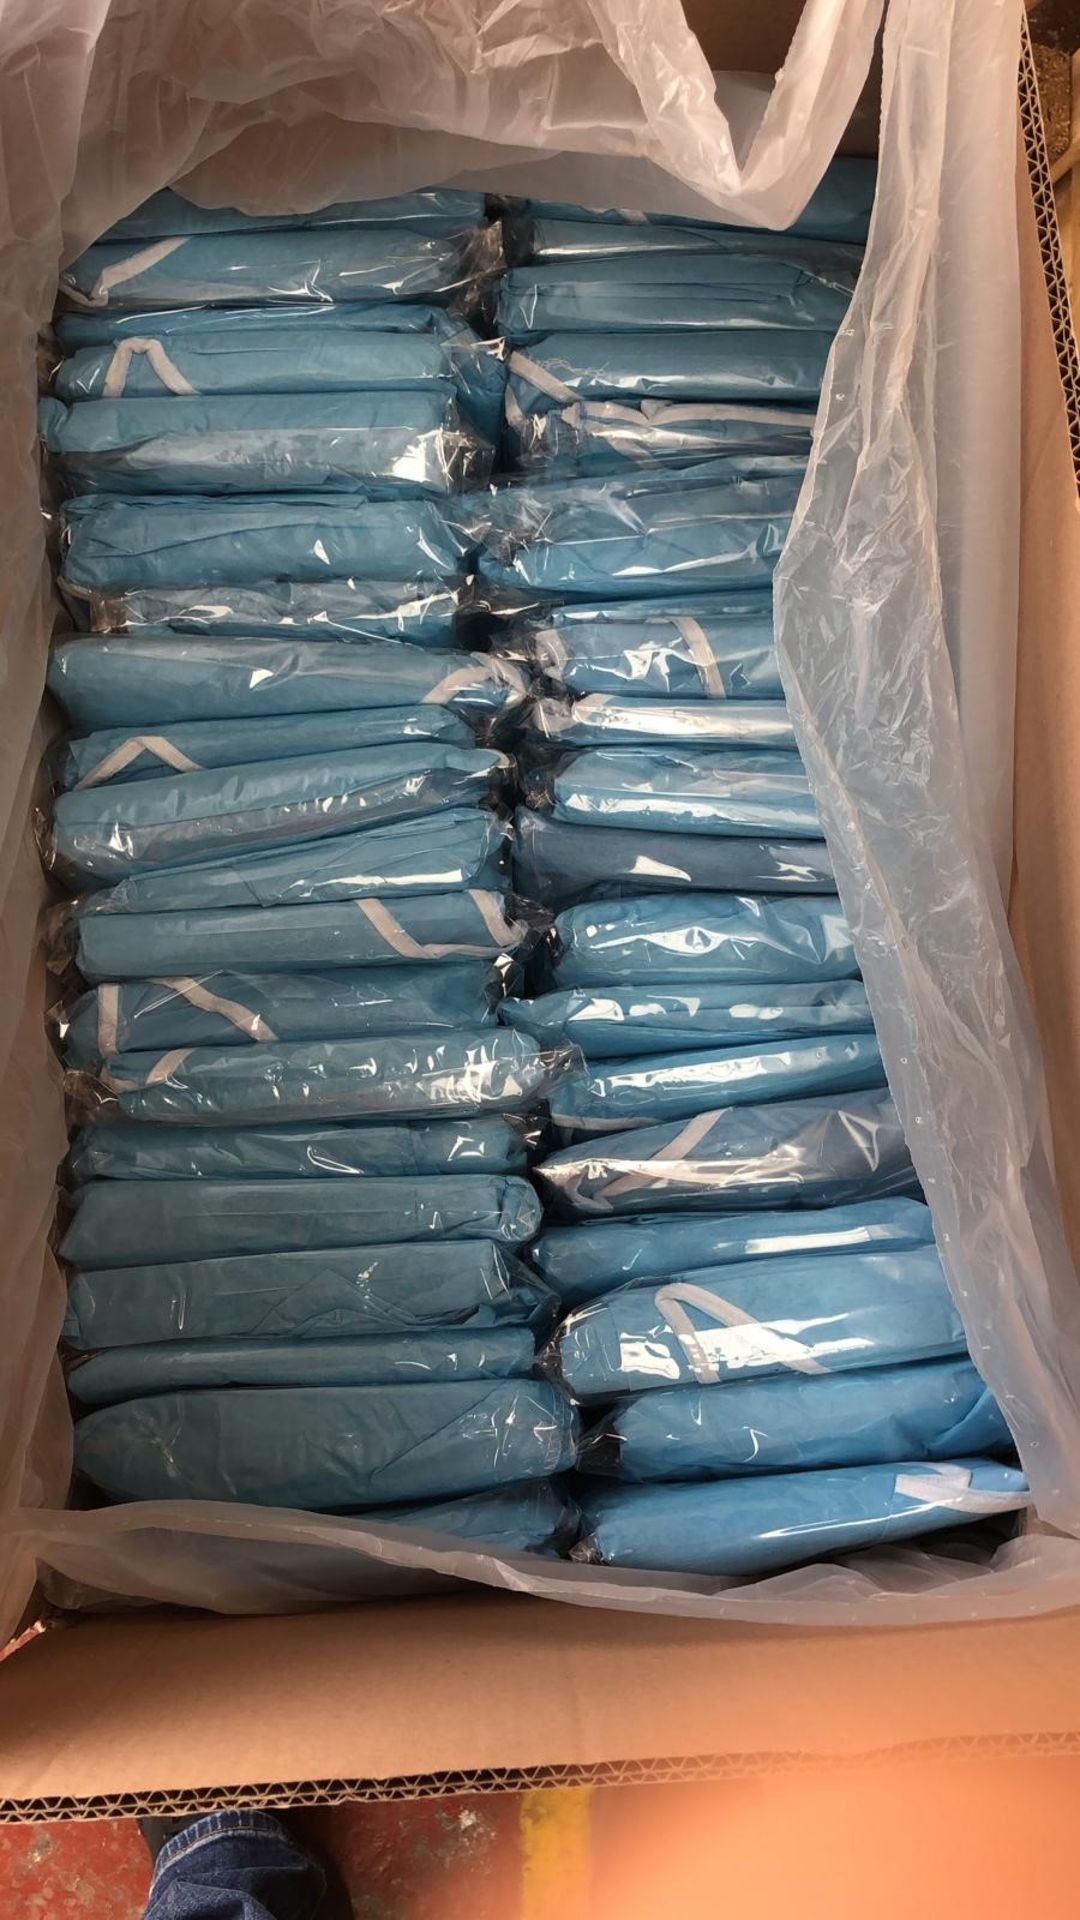 1200x Submed Non sterile 56g surgical gowns. 80 per box, 15 boxes per pallet. Documentati - Image 4 of 9